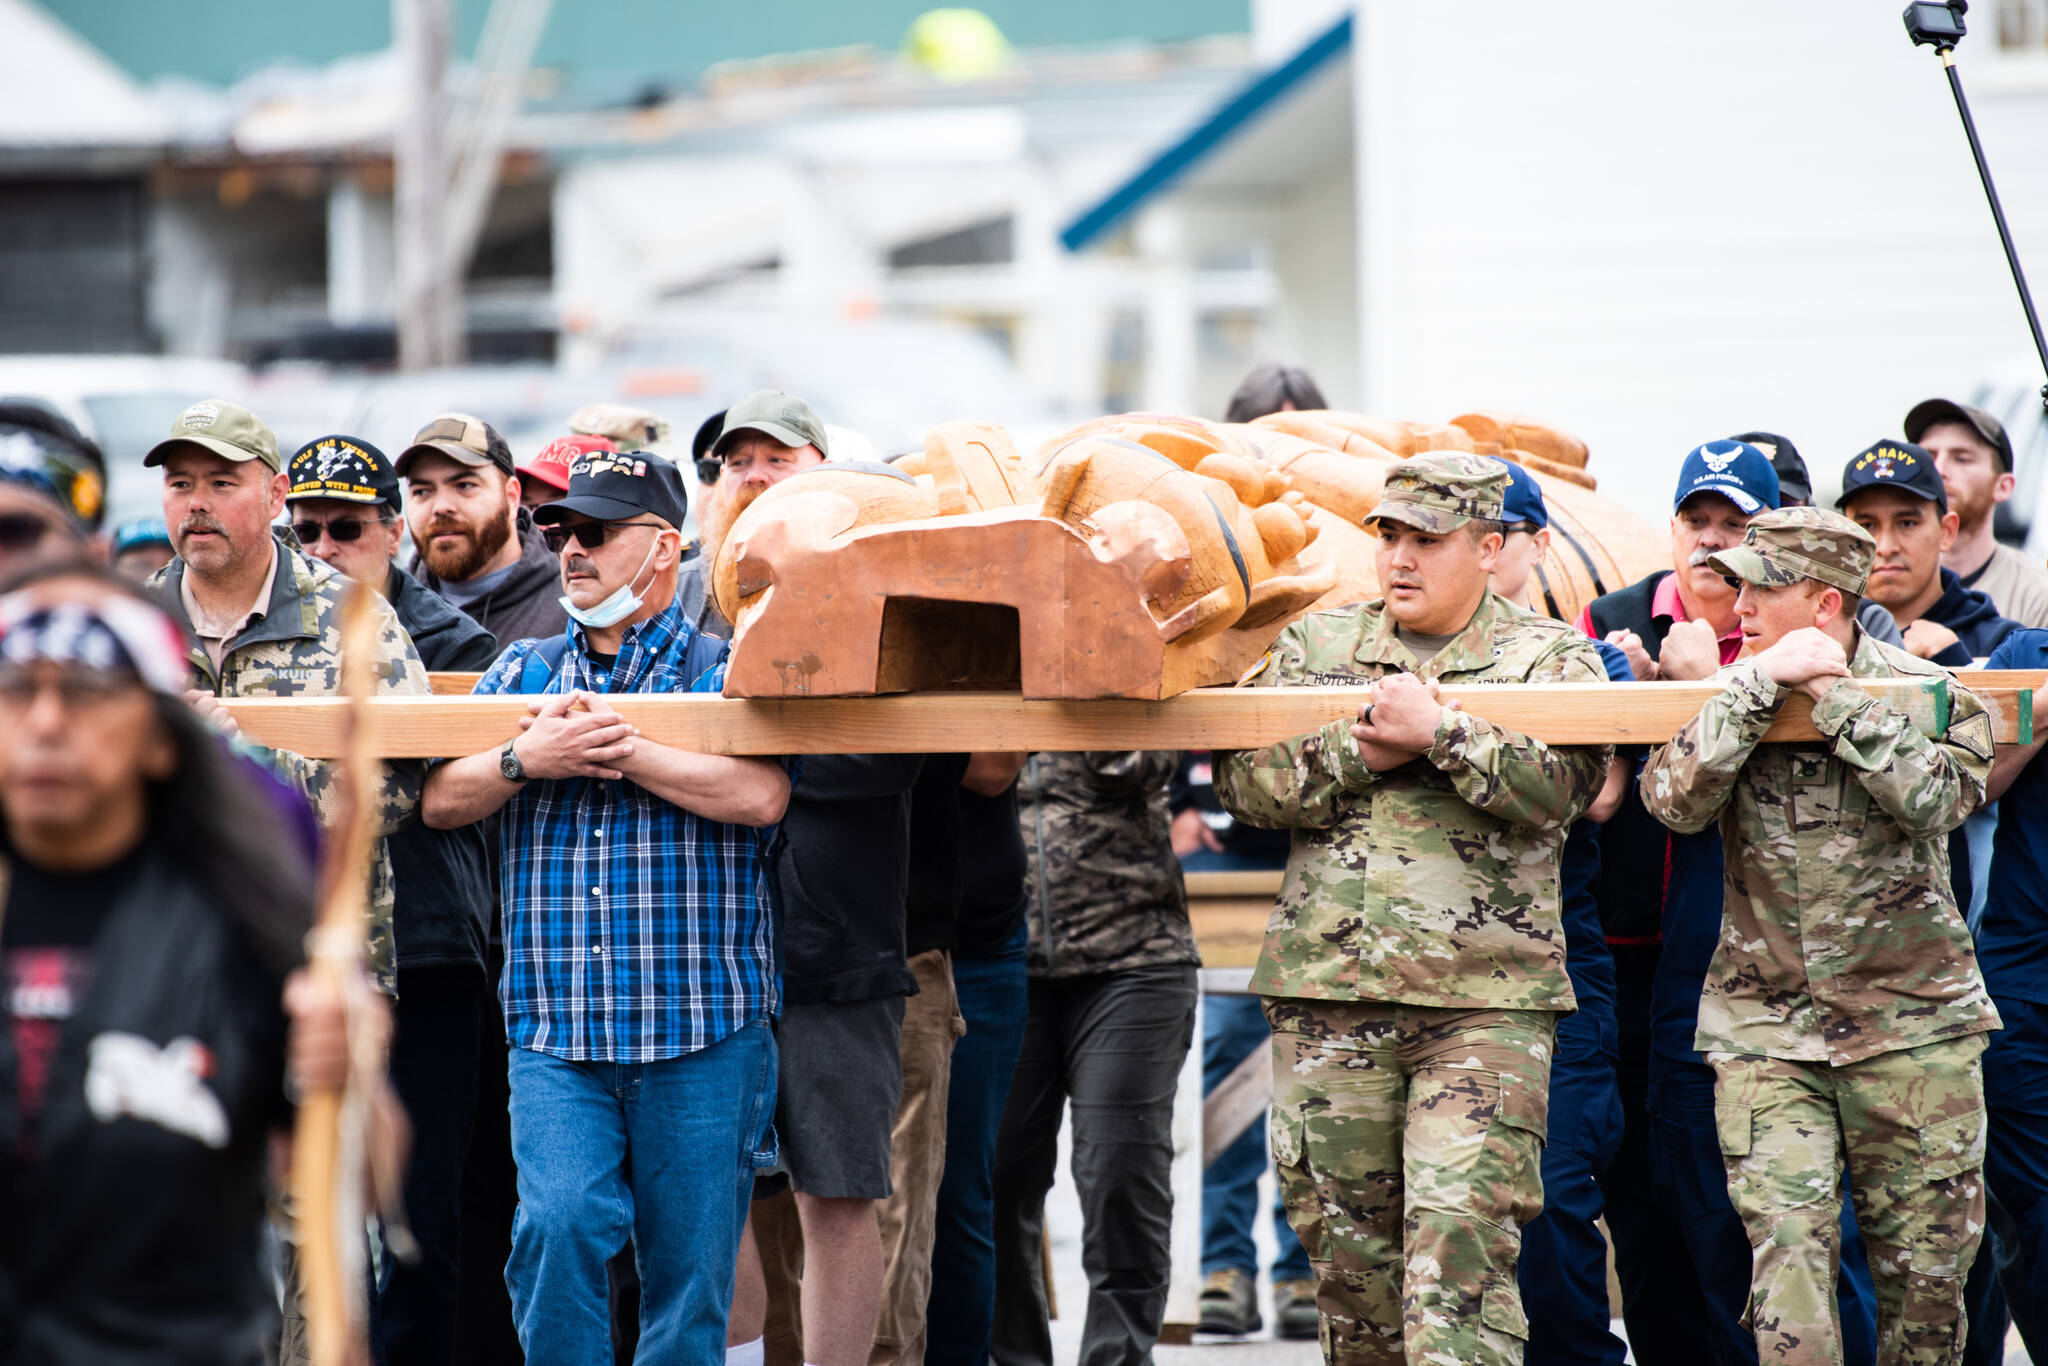 Veterans carry a totem pole before it is erected in Hoonah. In July, hundreds attended a ceremony at the Southeast Alaska village. The totem pole honors the contributions of Alaska Natives in many U.S. conflicts. (Courtesy Photo / Ian Johnson)